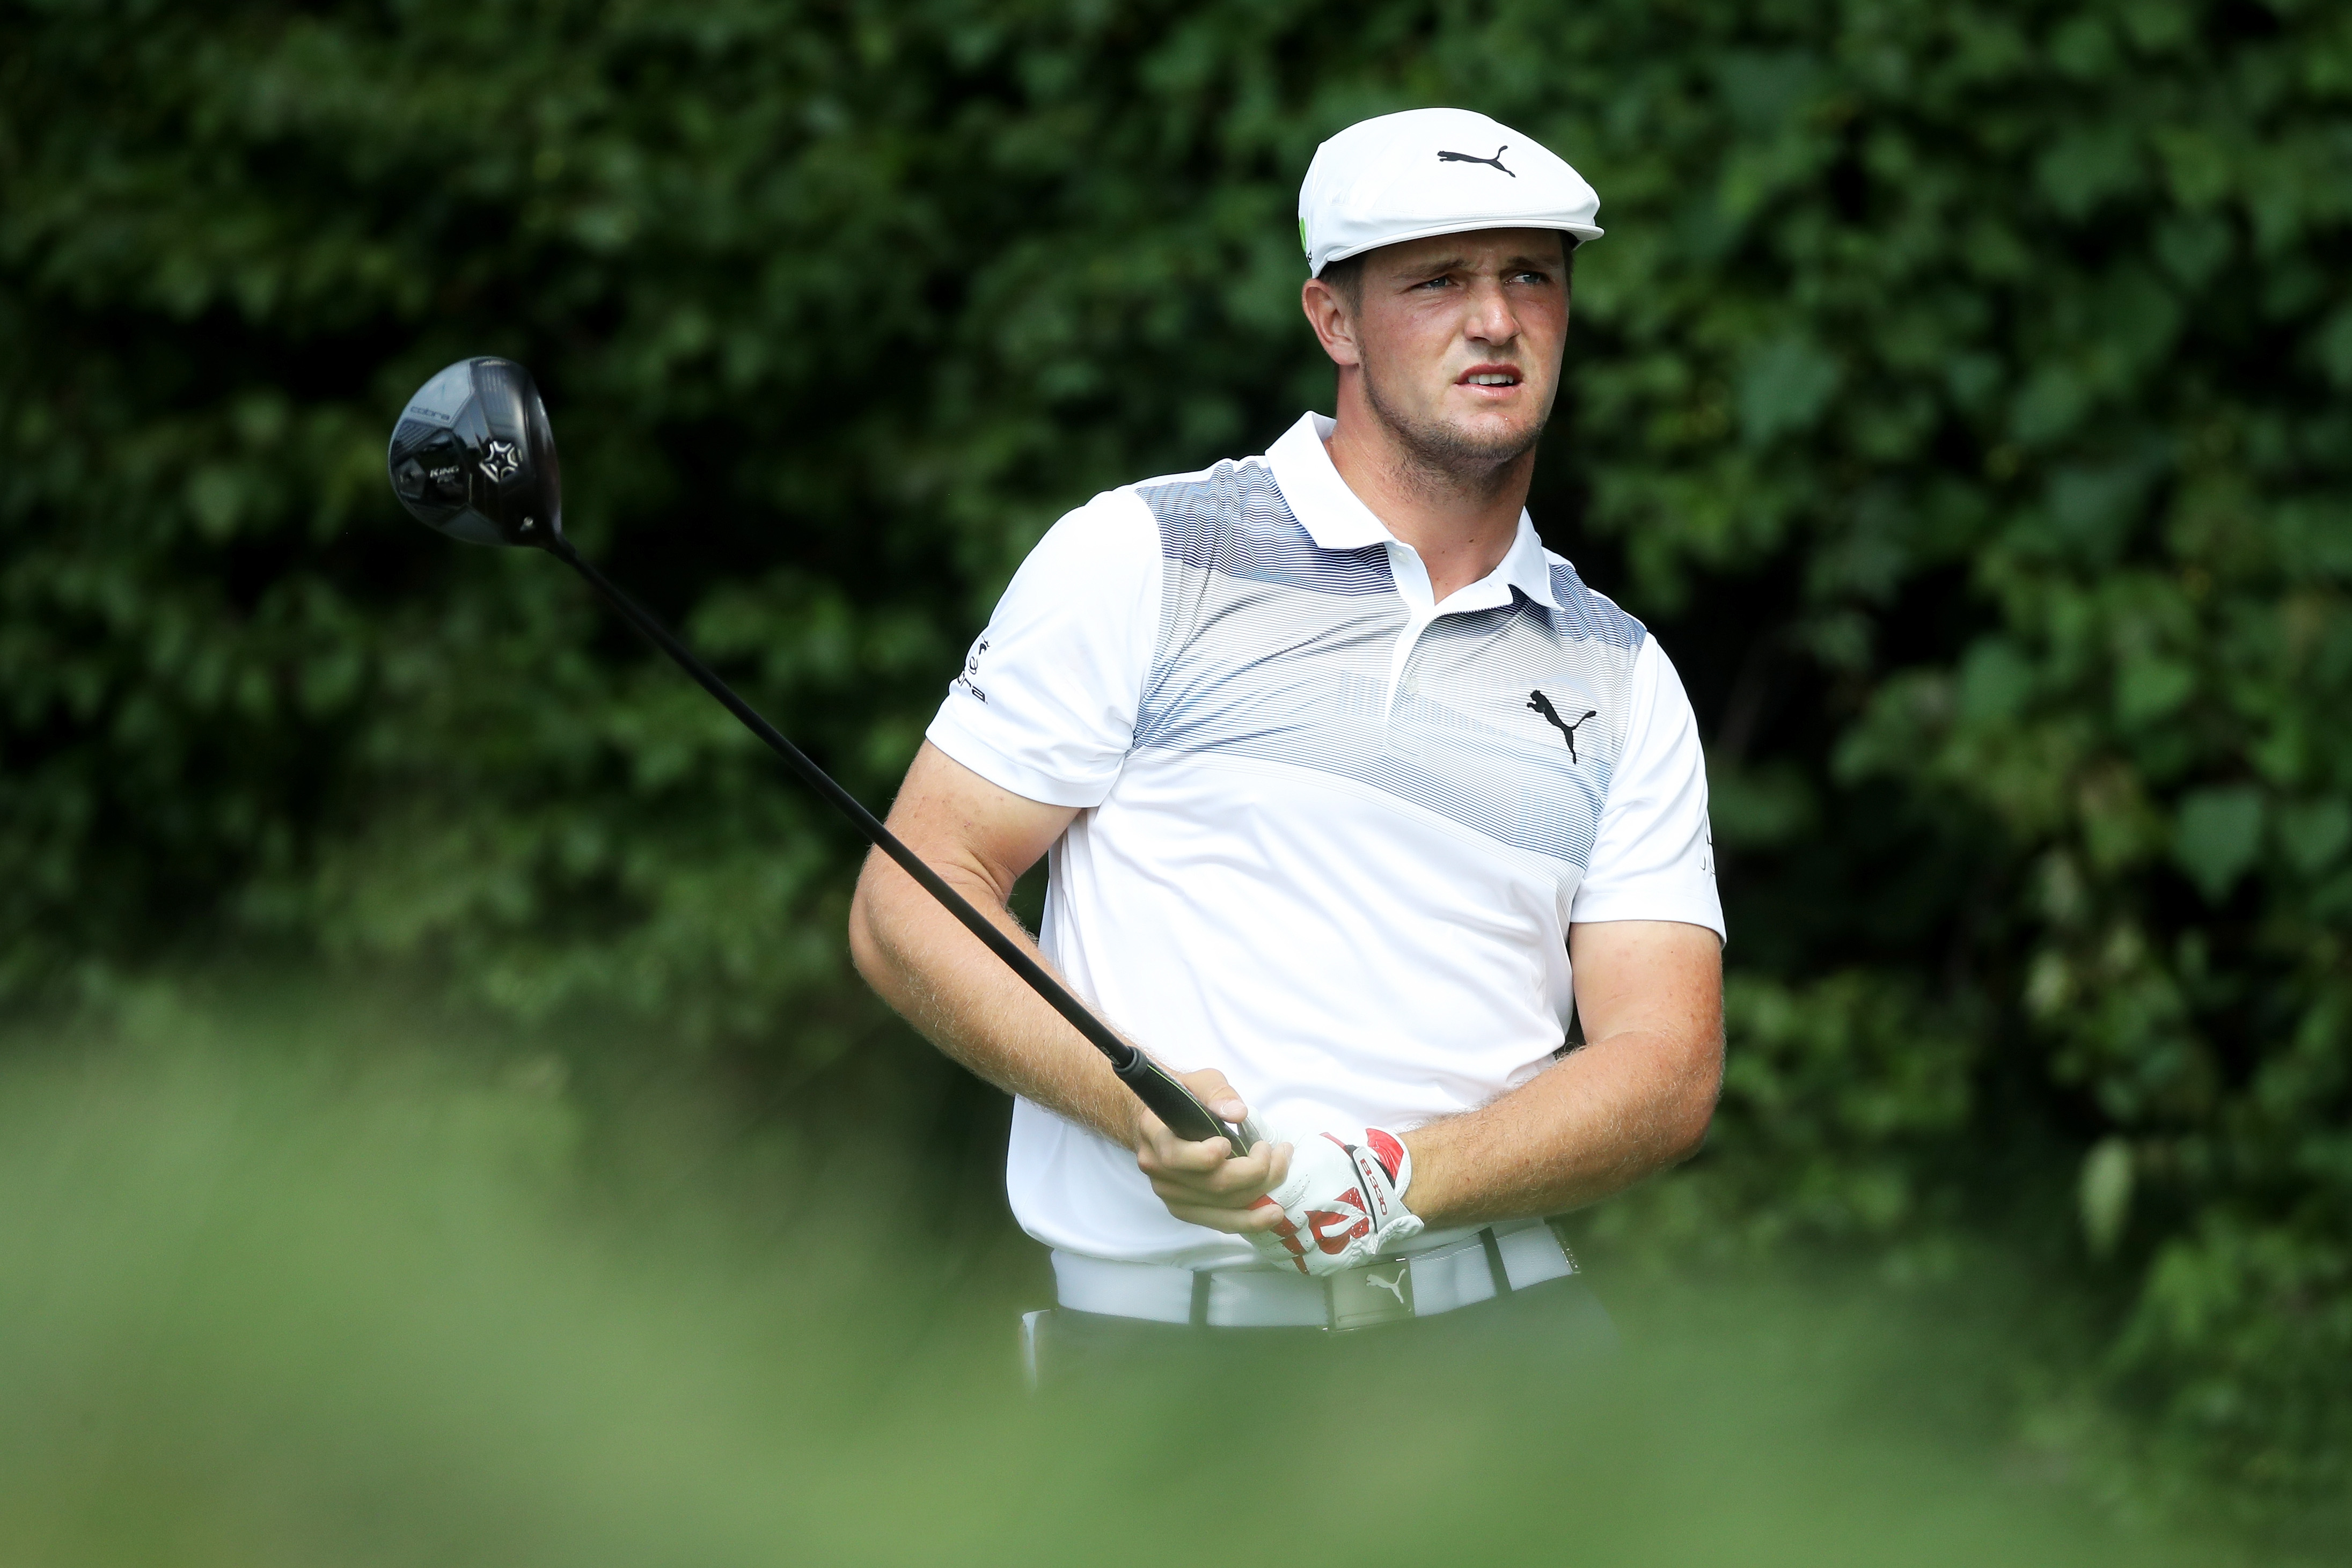 Bryson DeChambeau wins Northern Trust, moves to No.1 in FedEx Cup race